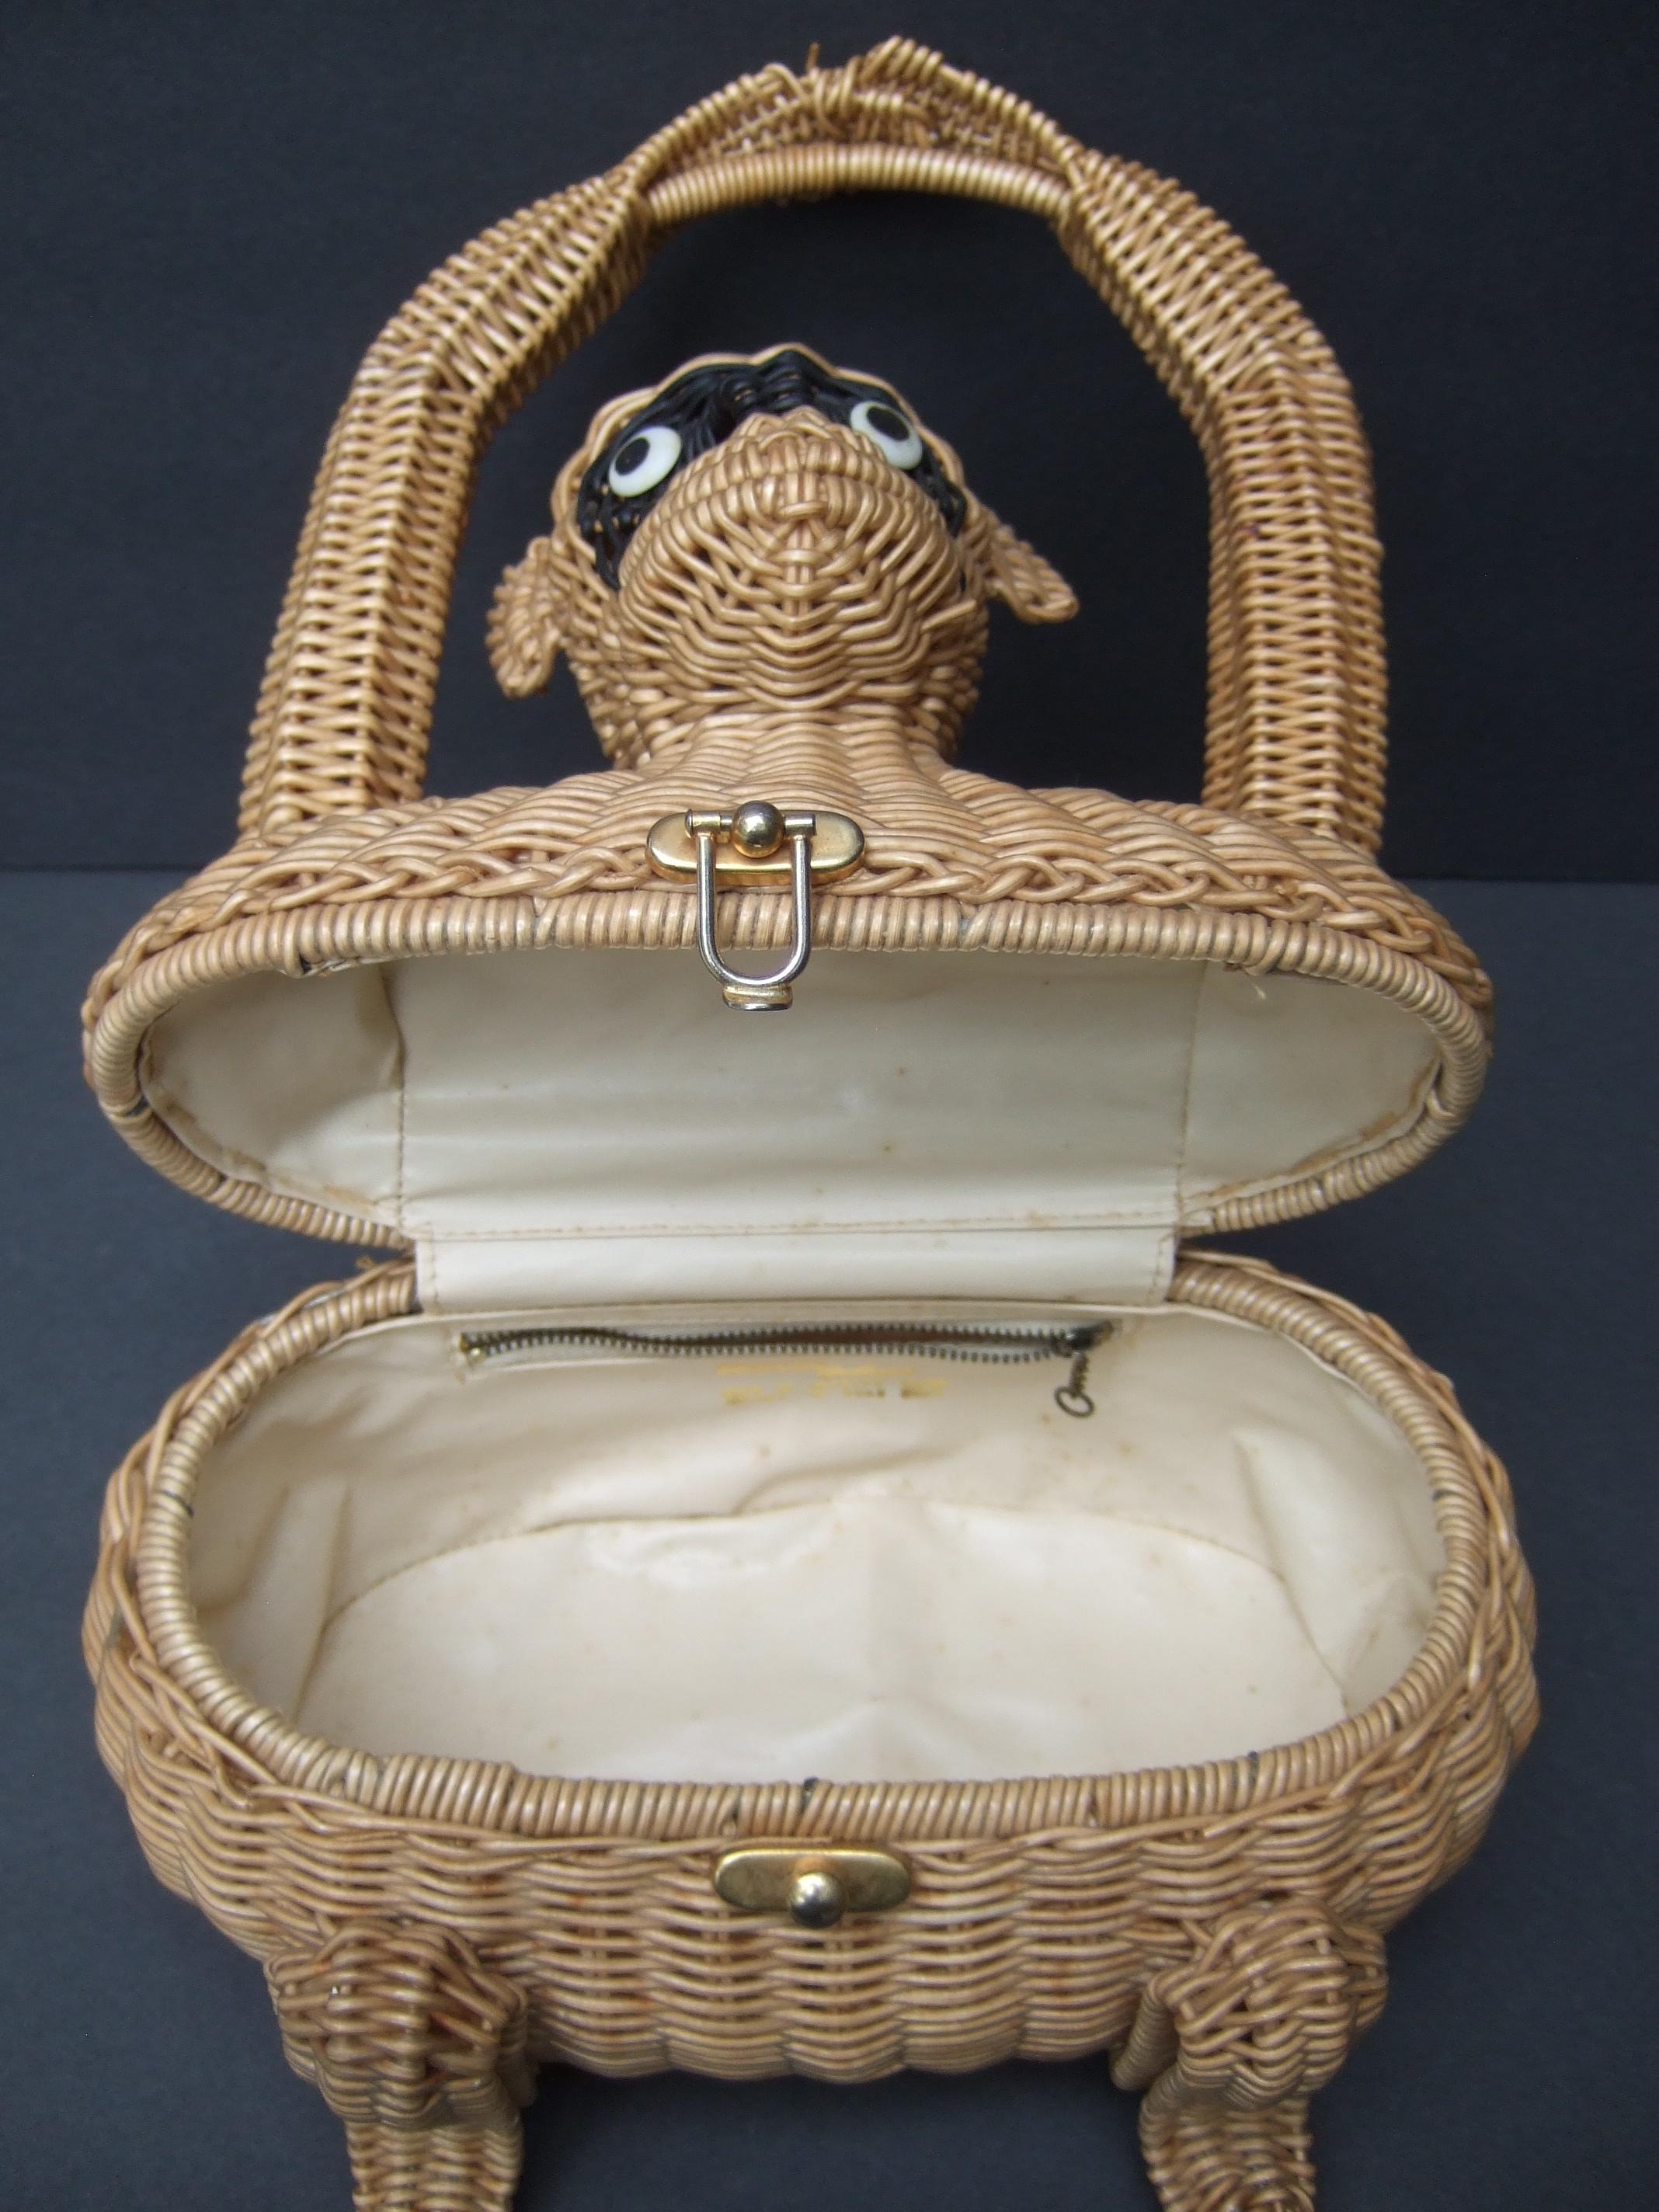 Whimsical Very Rare Wicker Monkey Handbag Designed by Marcus Brothers c 1960 For Sale 15